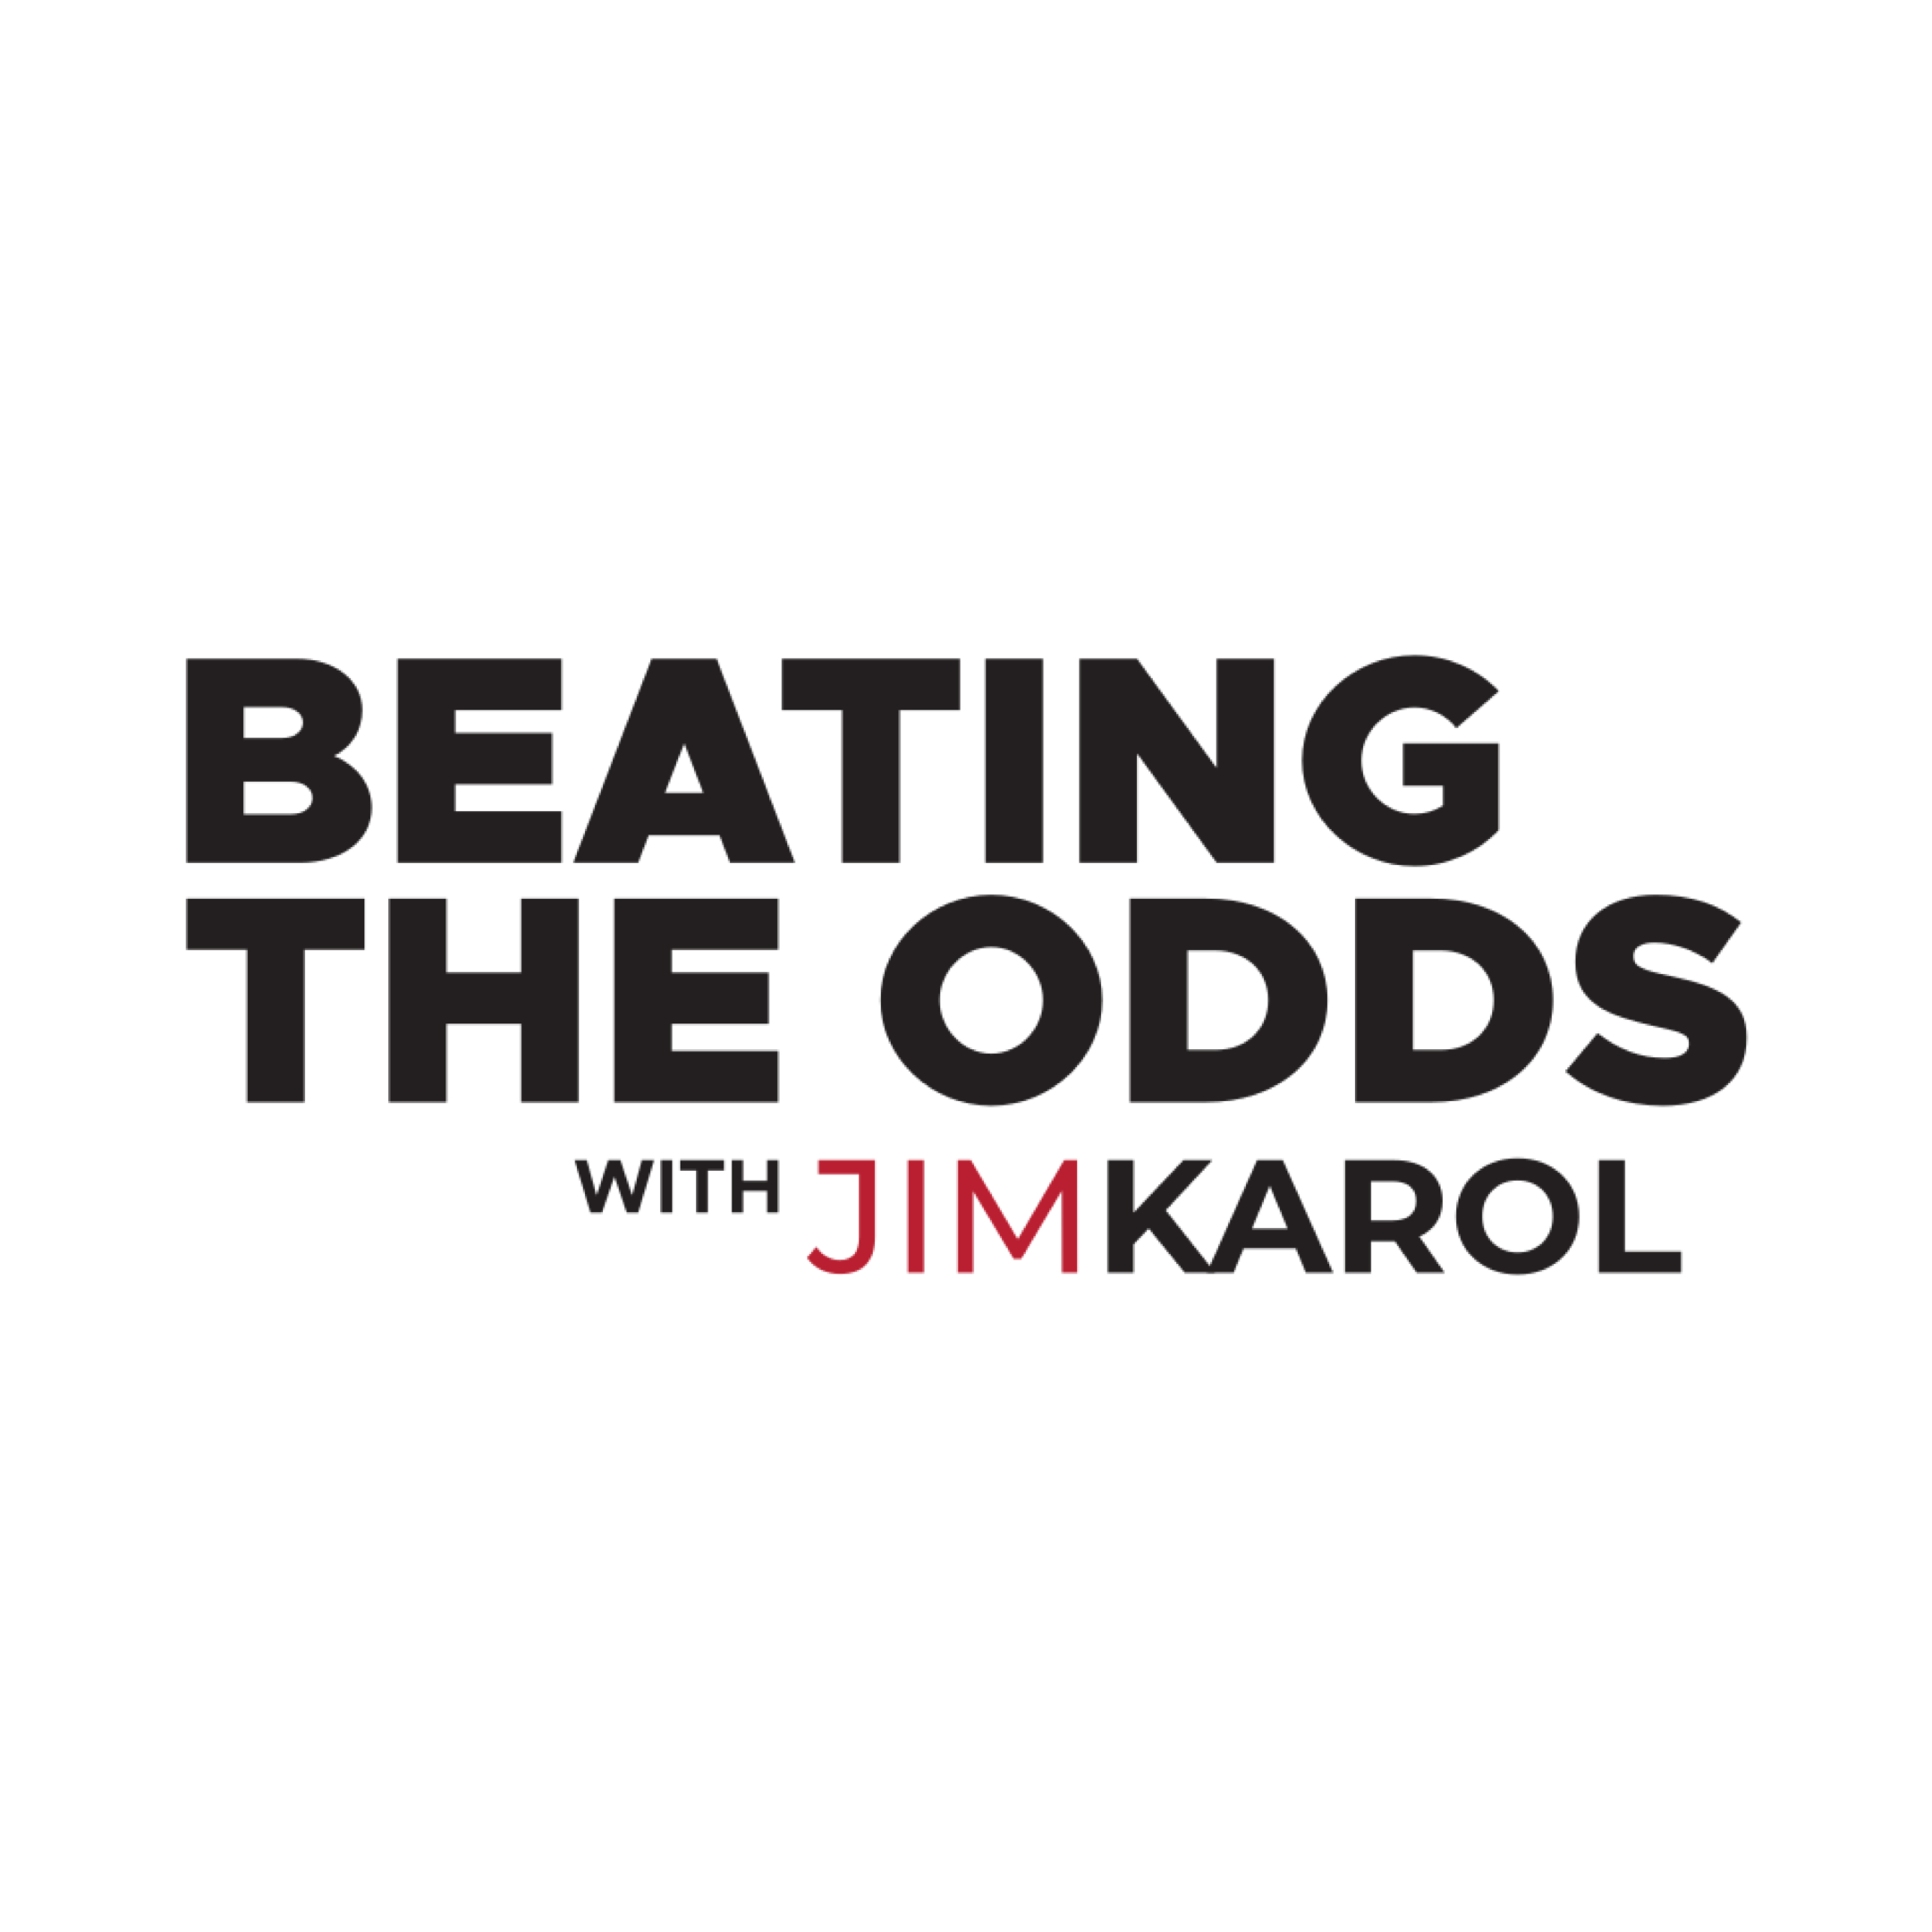 Beating The Odds cover logo